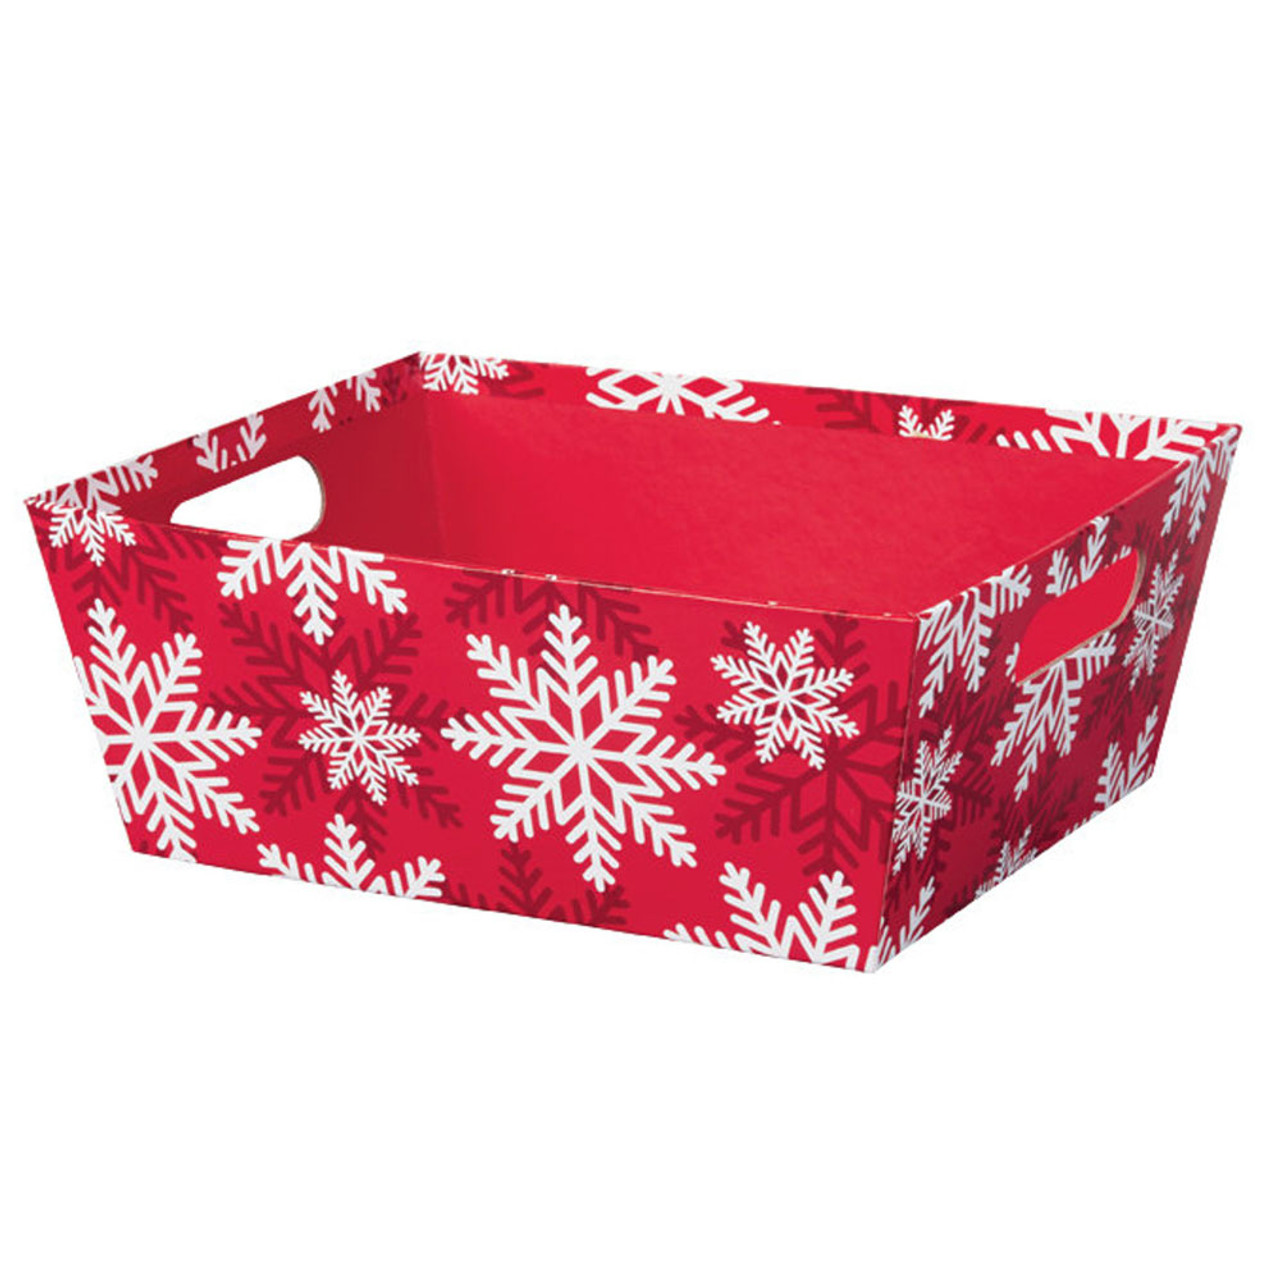 12"l x 9-1/2"w x 4-1/2"h Red and White Snowflake Basket Tray